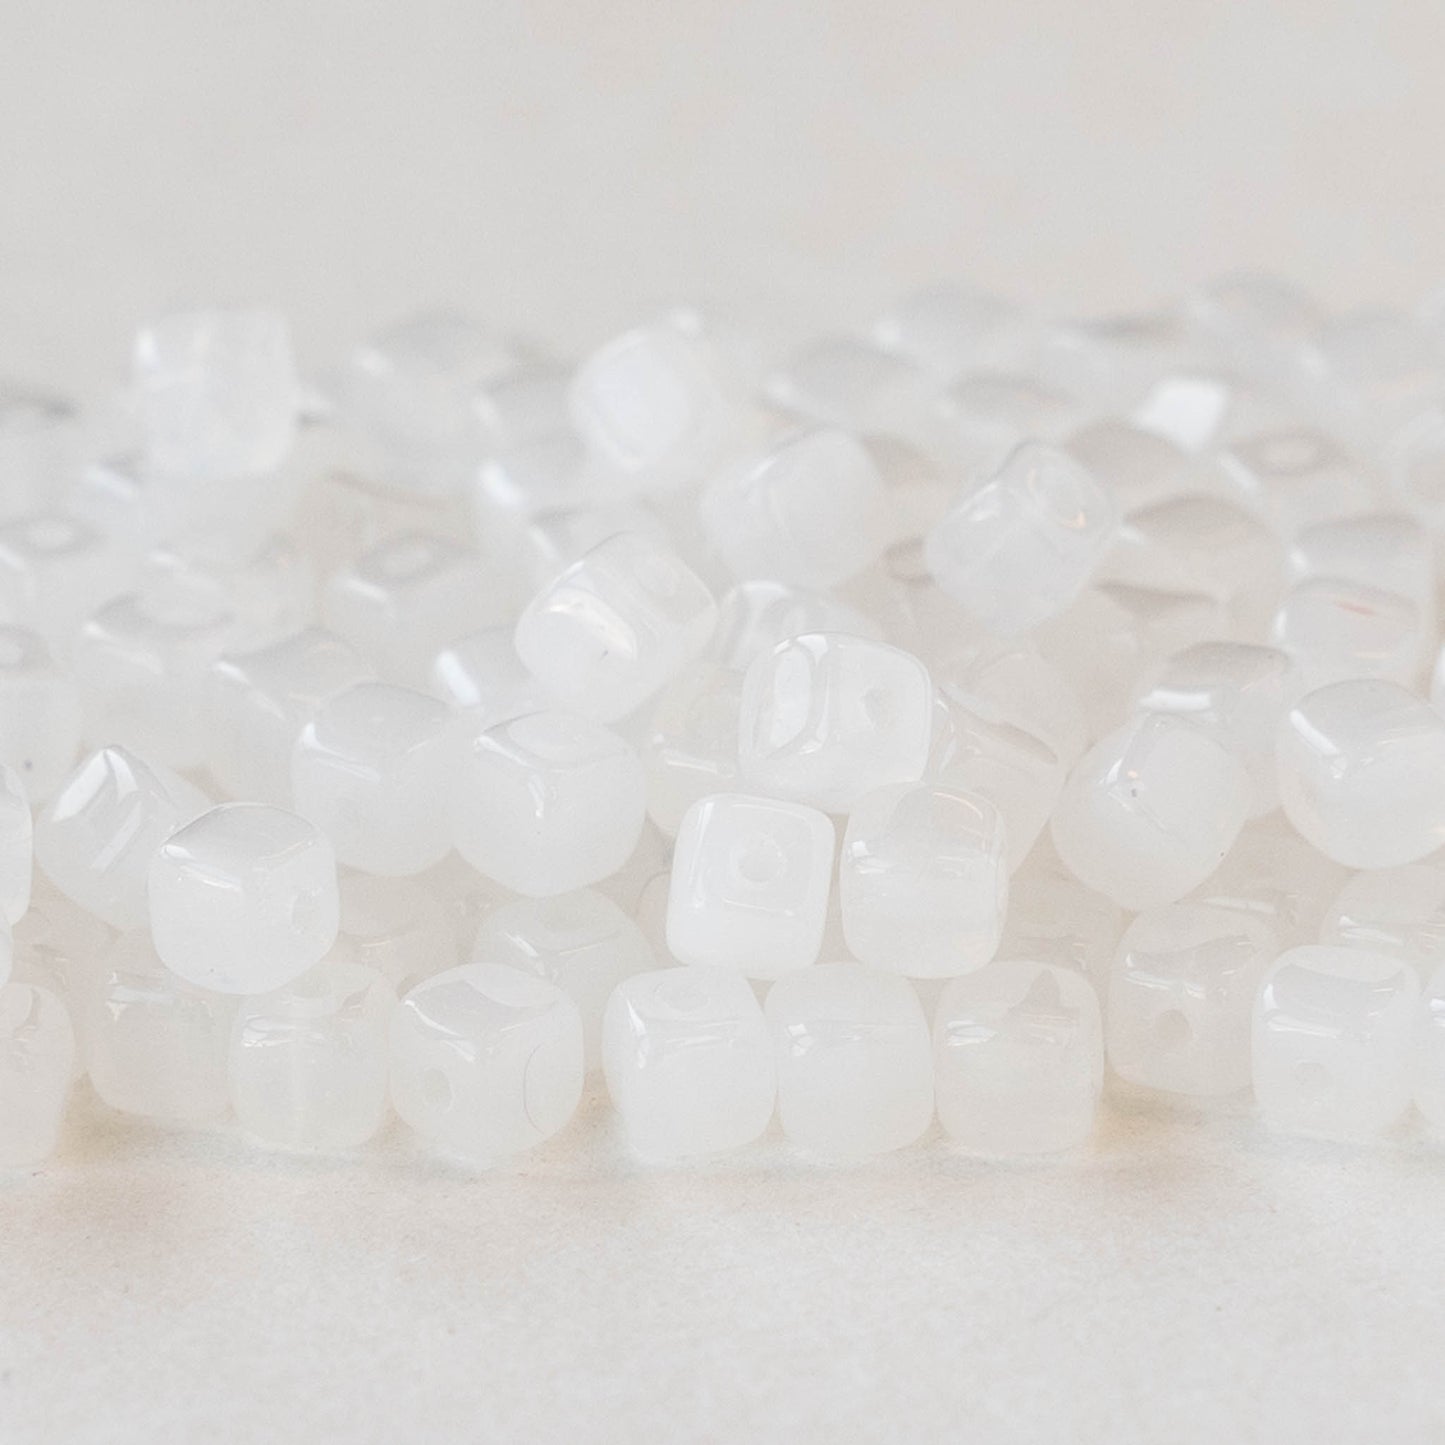 3.5mm Glass Cube Beads - Pearly Opaline - 100 beads